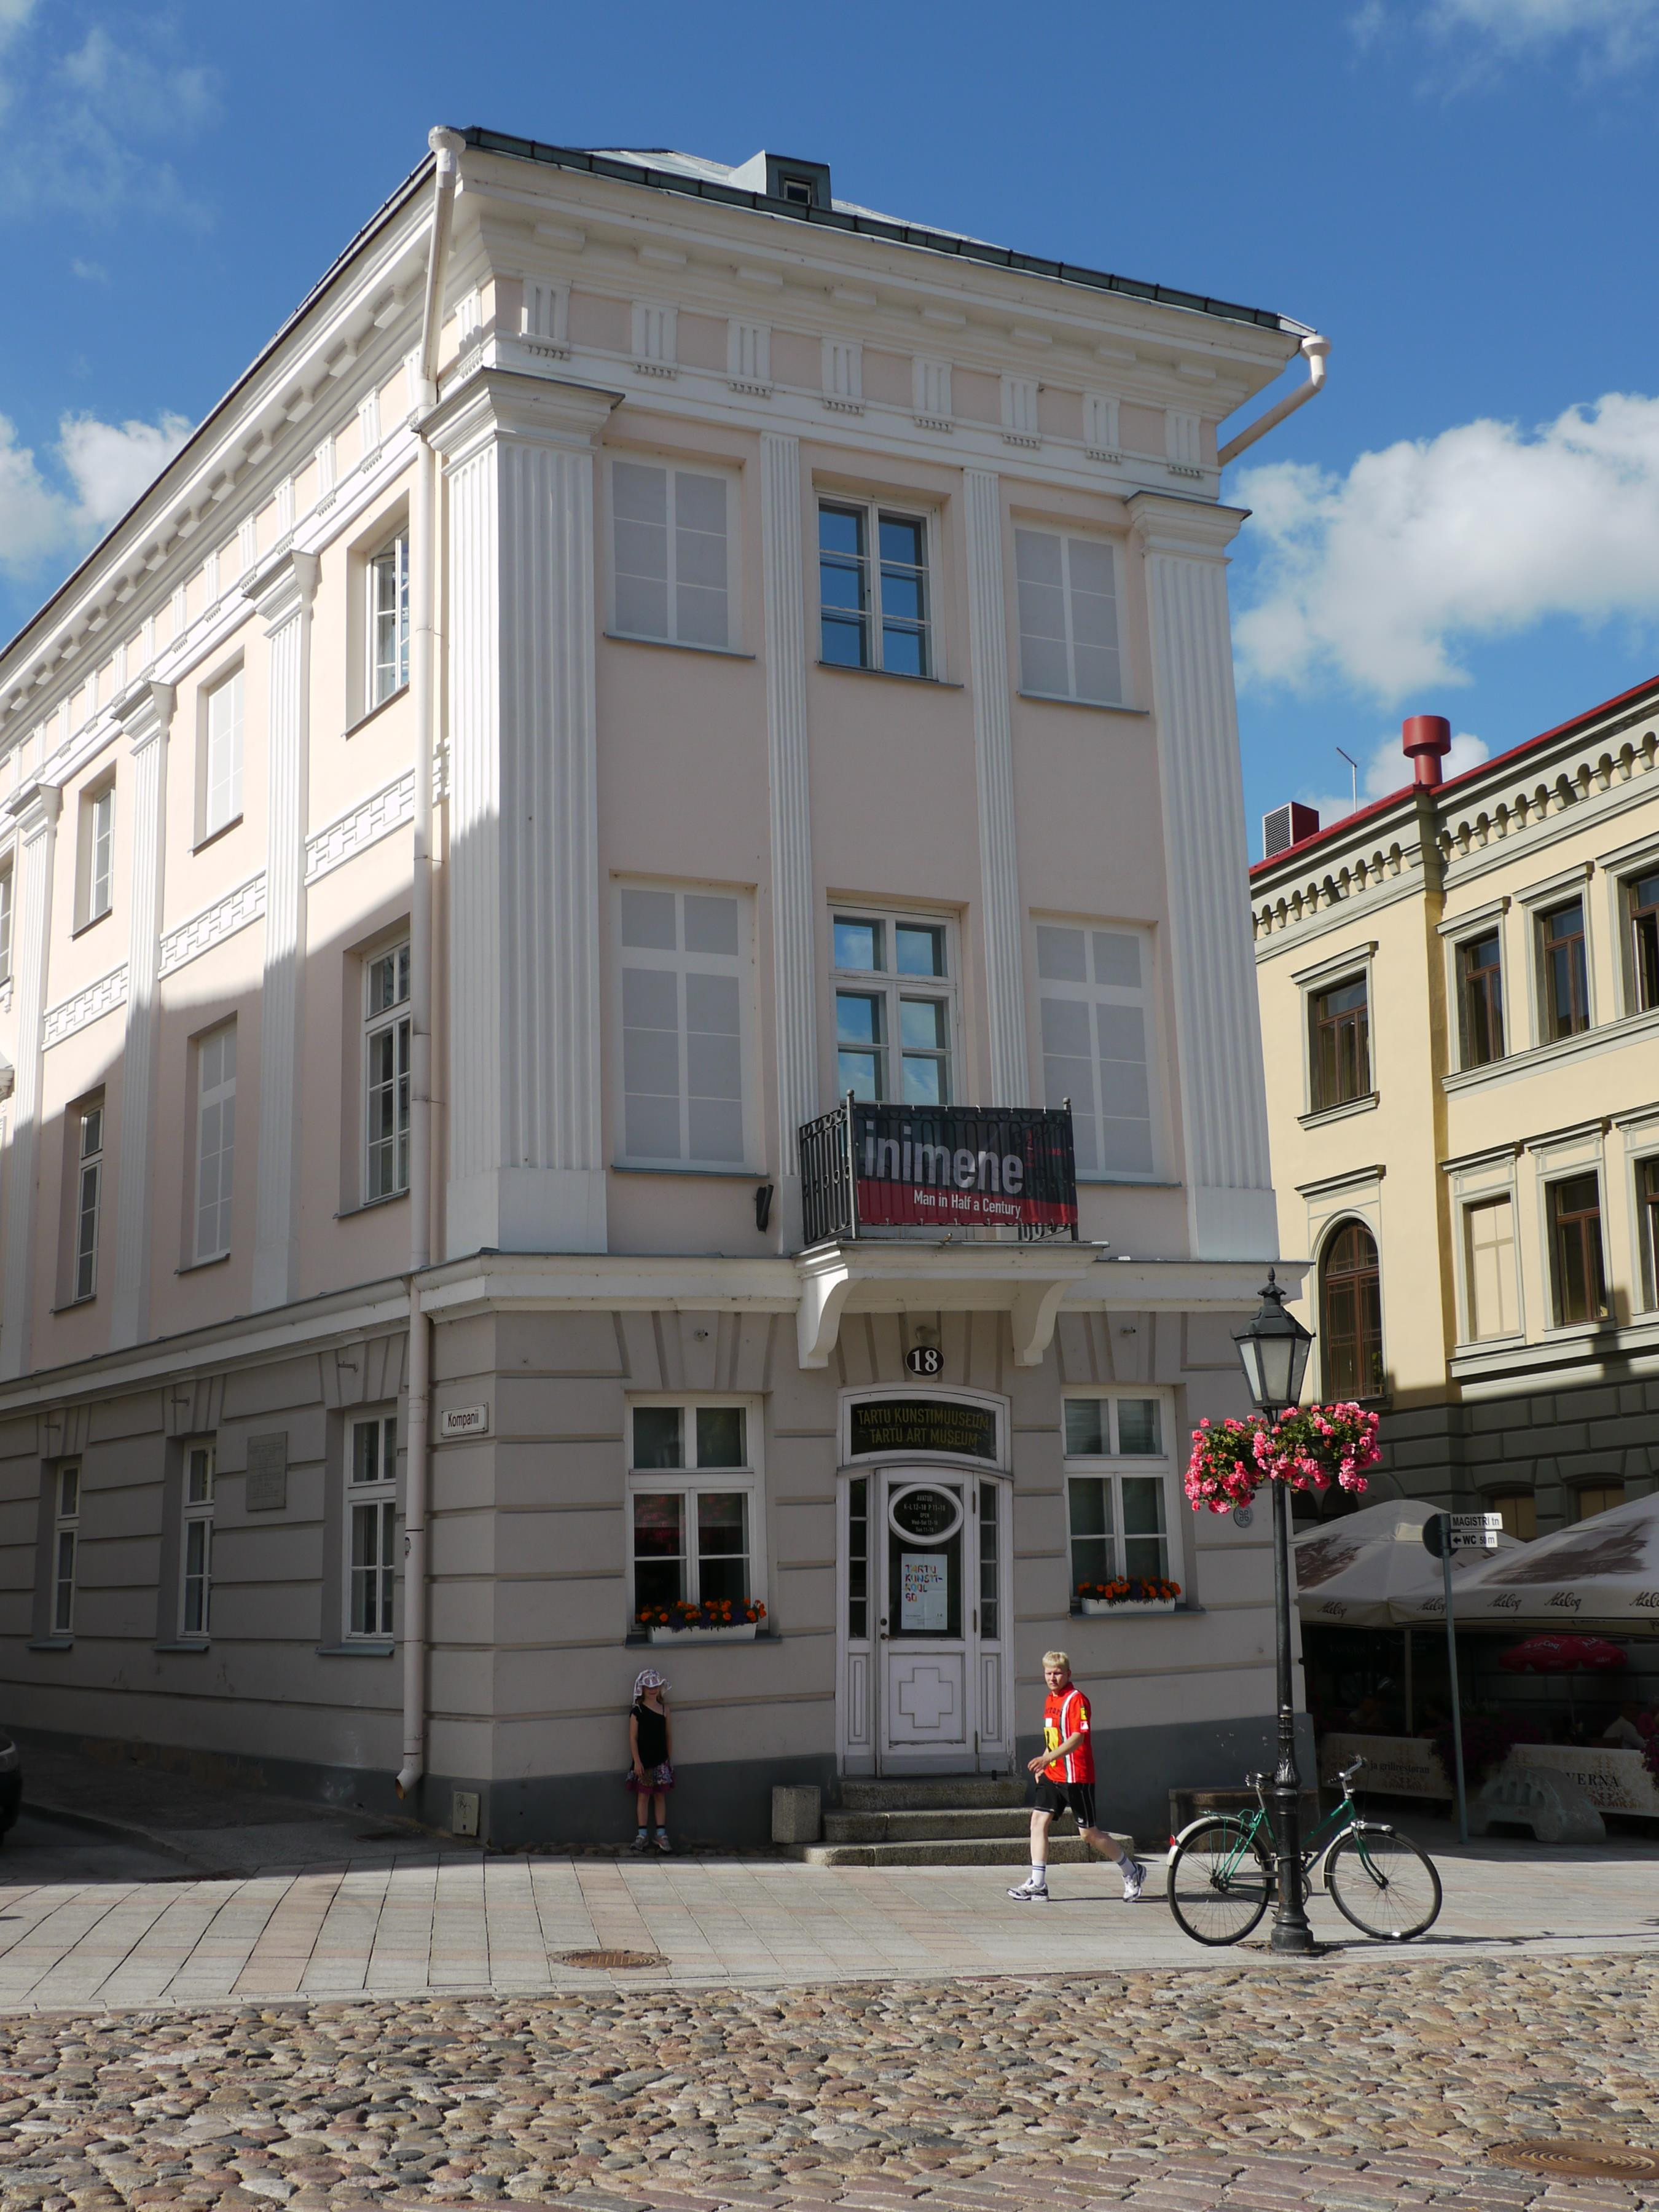 The leaning house of Tartu (housing the excellent Tartu Art Museum)